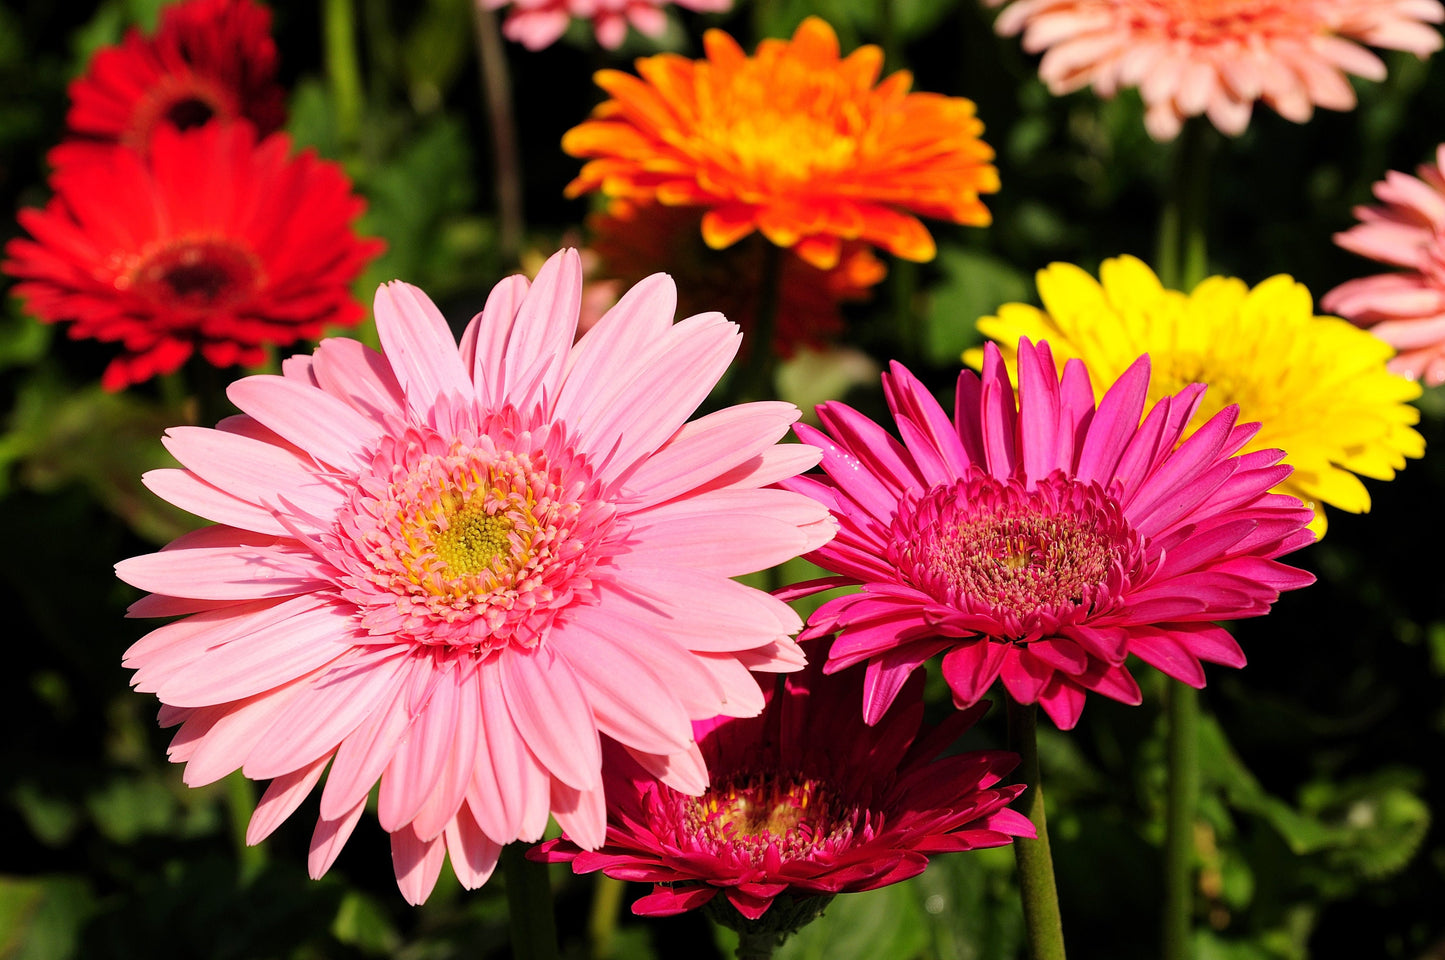 20 GERBER DAISY Mix Gerbera Jamesonii aka Barberton or African Daisy Mixed Colors Pink Purple Red Orange Yellow White Flower Seeds